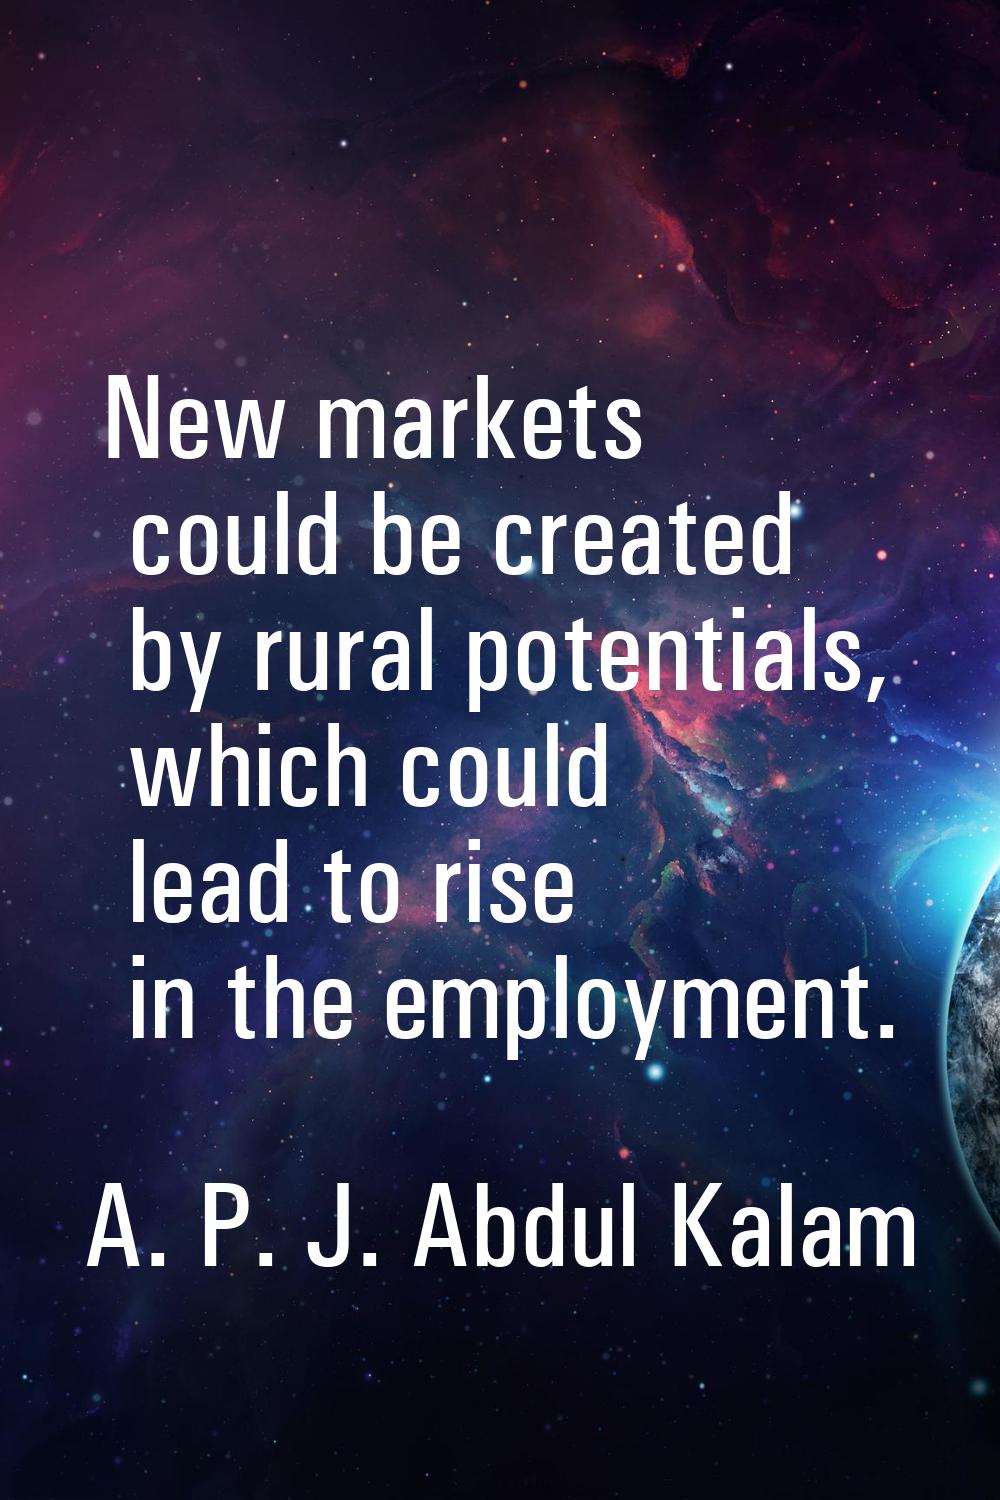 New markets could be created by rural potentials, which could lead to rise in the employment.